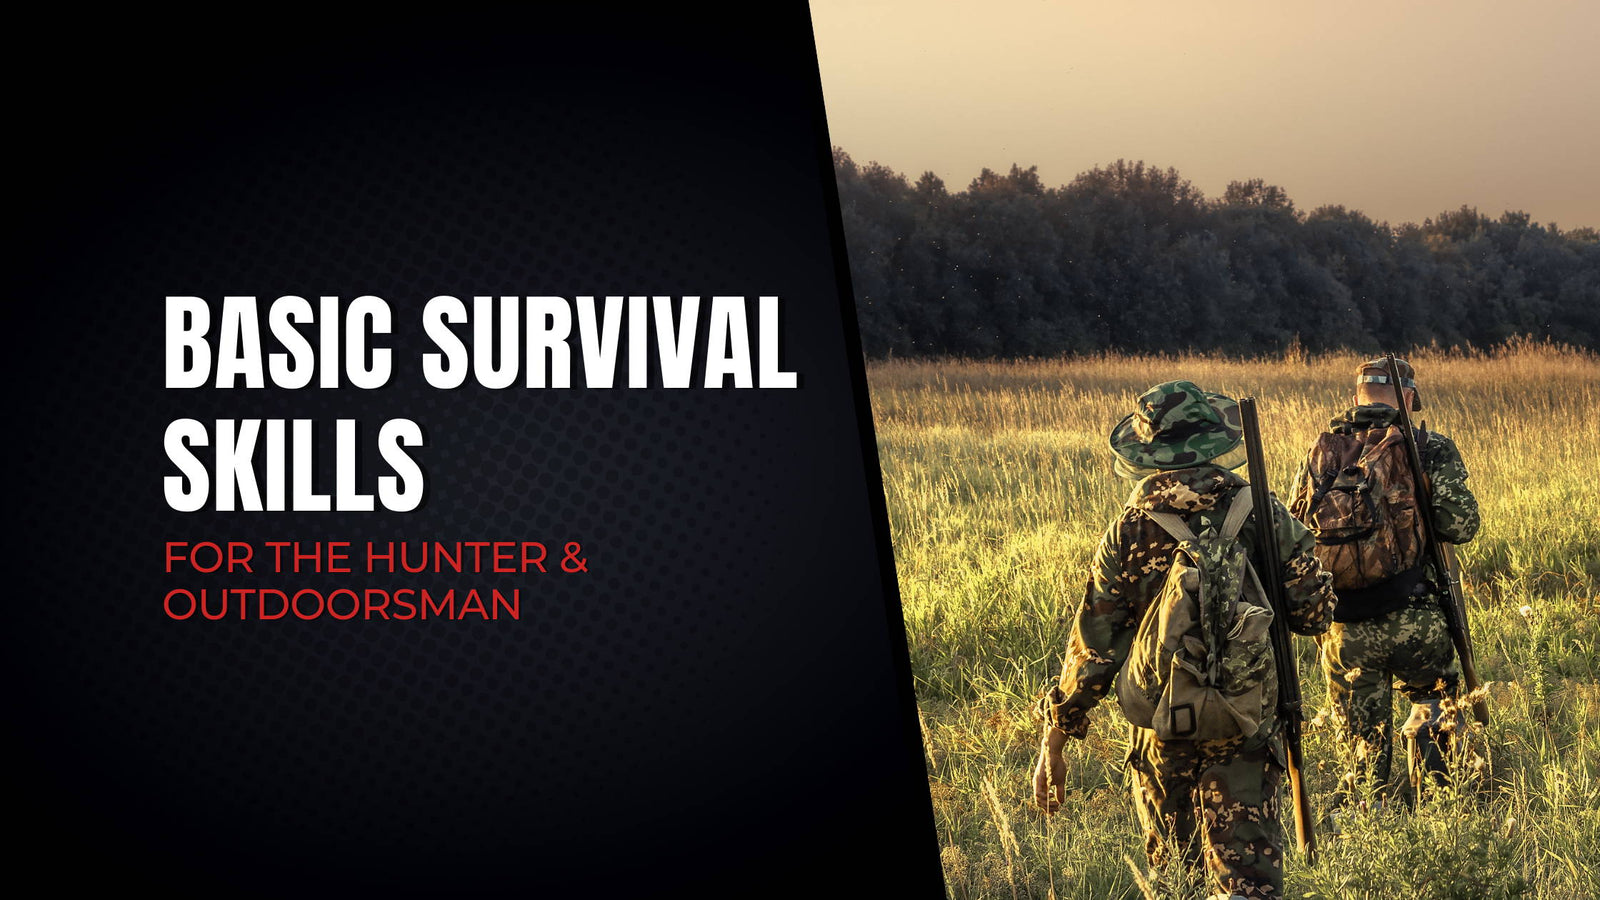 Basic Survival Skills for the Hunter and Outdoorsman